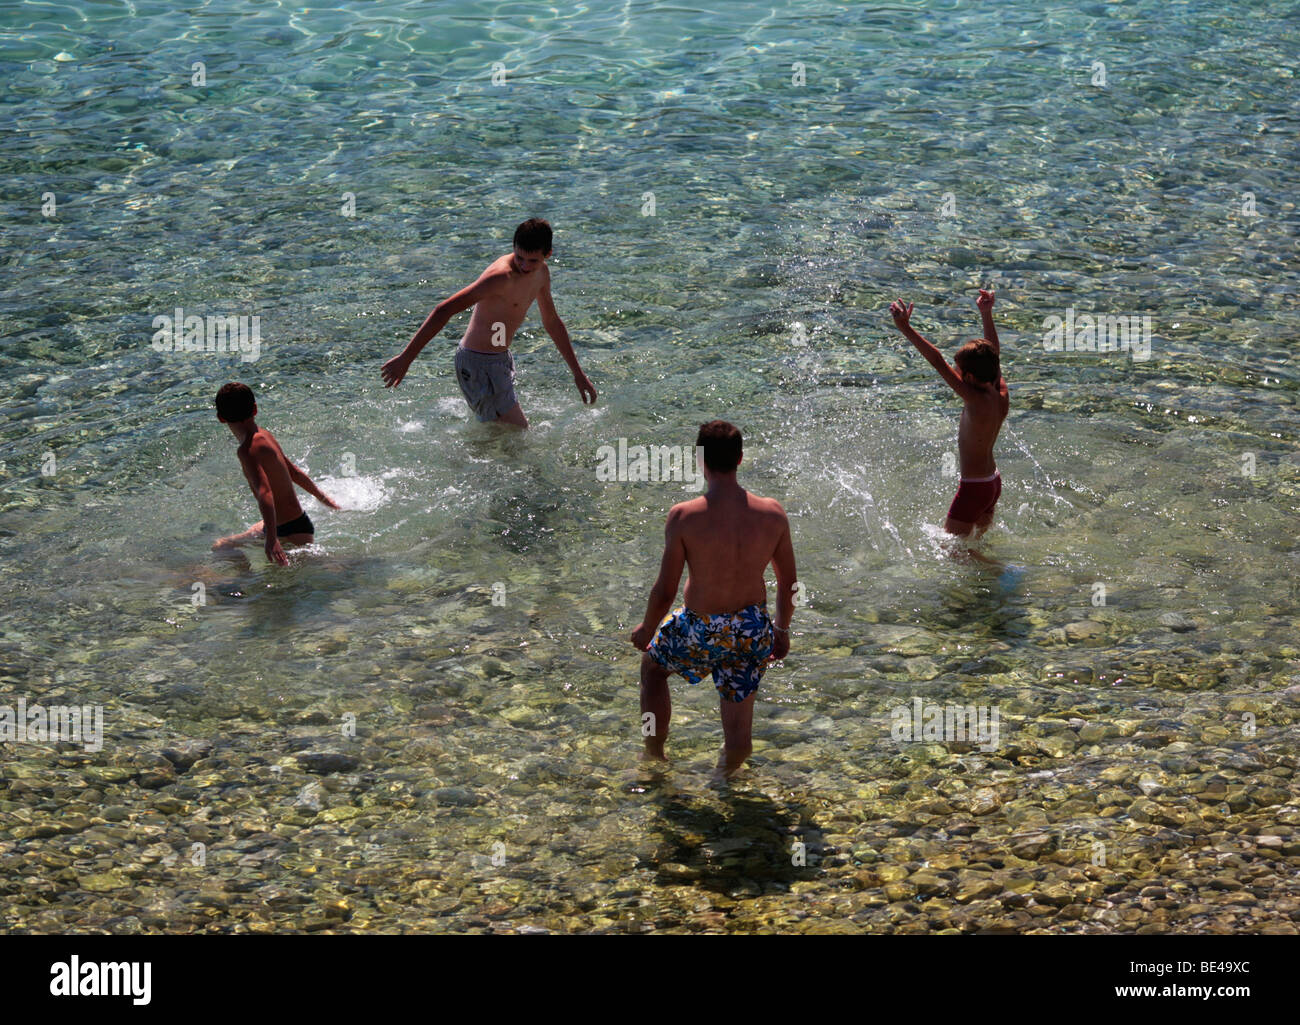 people splashing around in clear water at the beach Stock Photo